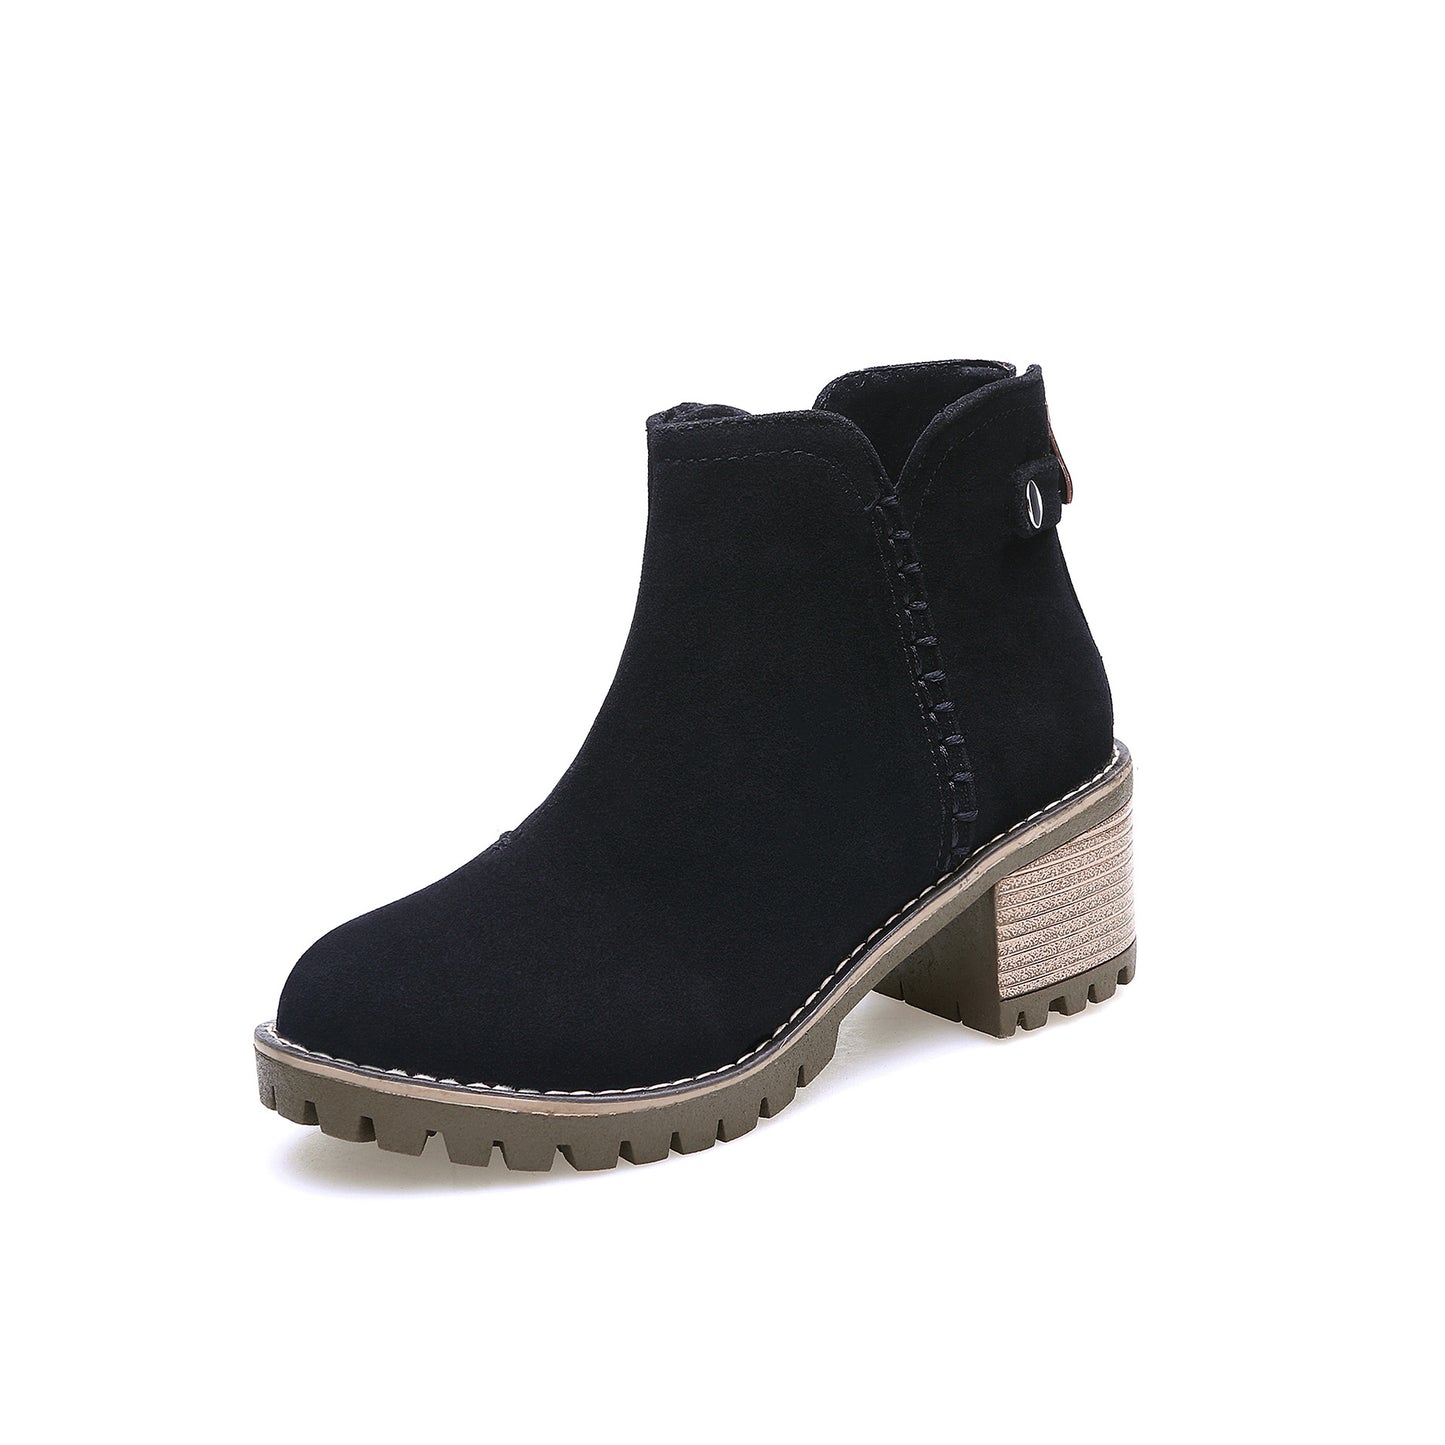 Suede Chelsea Boots Winter Fall Student Short Boots Women Shoes